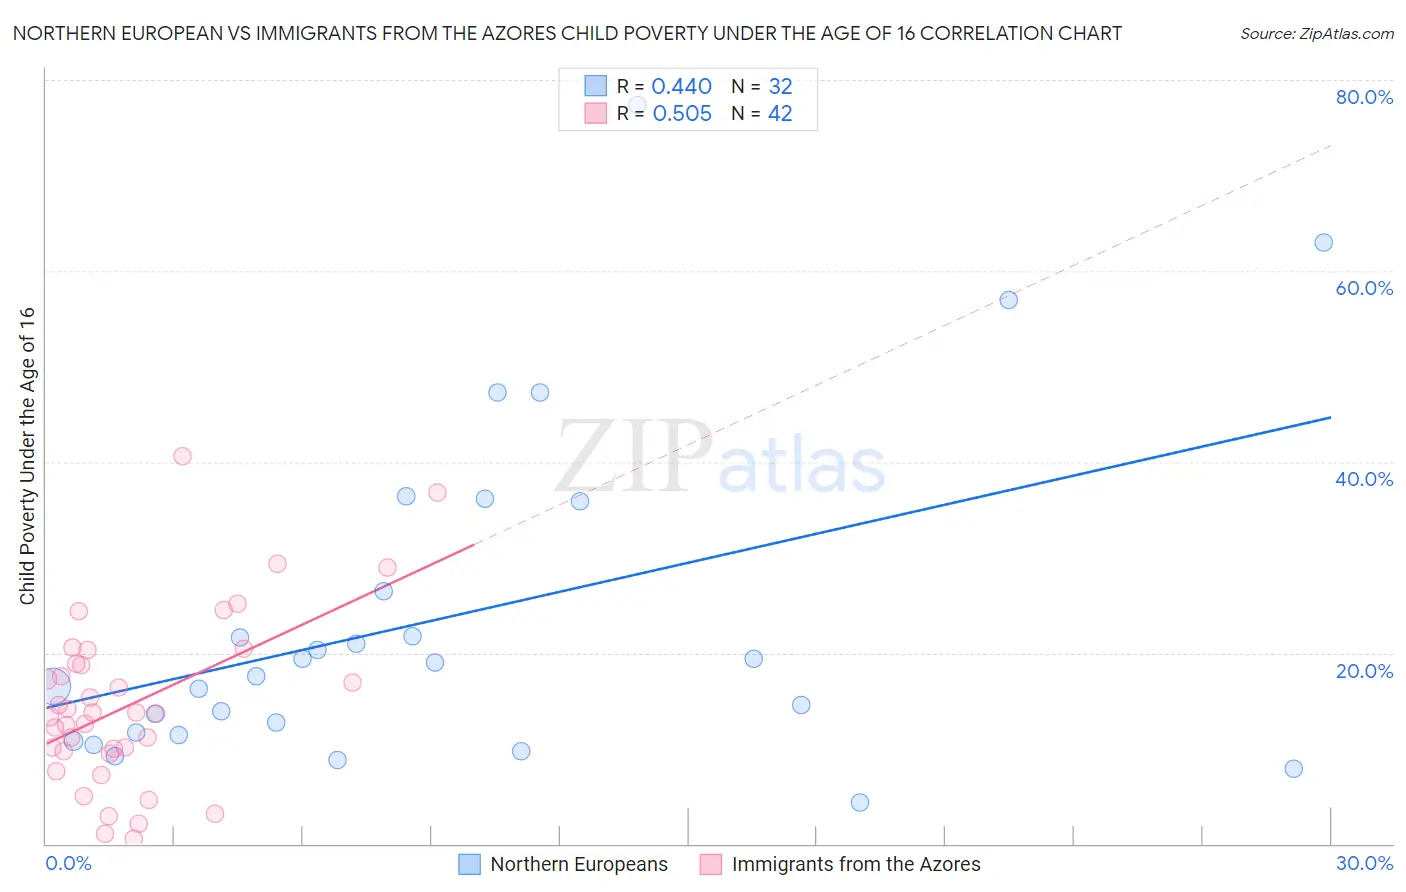 Northern European vs Immigrants from the Azores Child Poverty Under the Age of 16